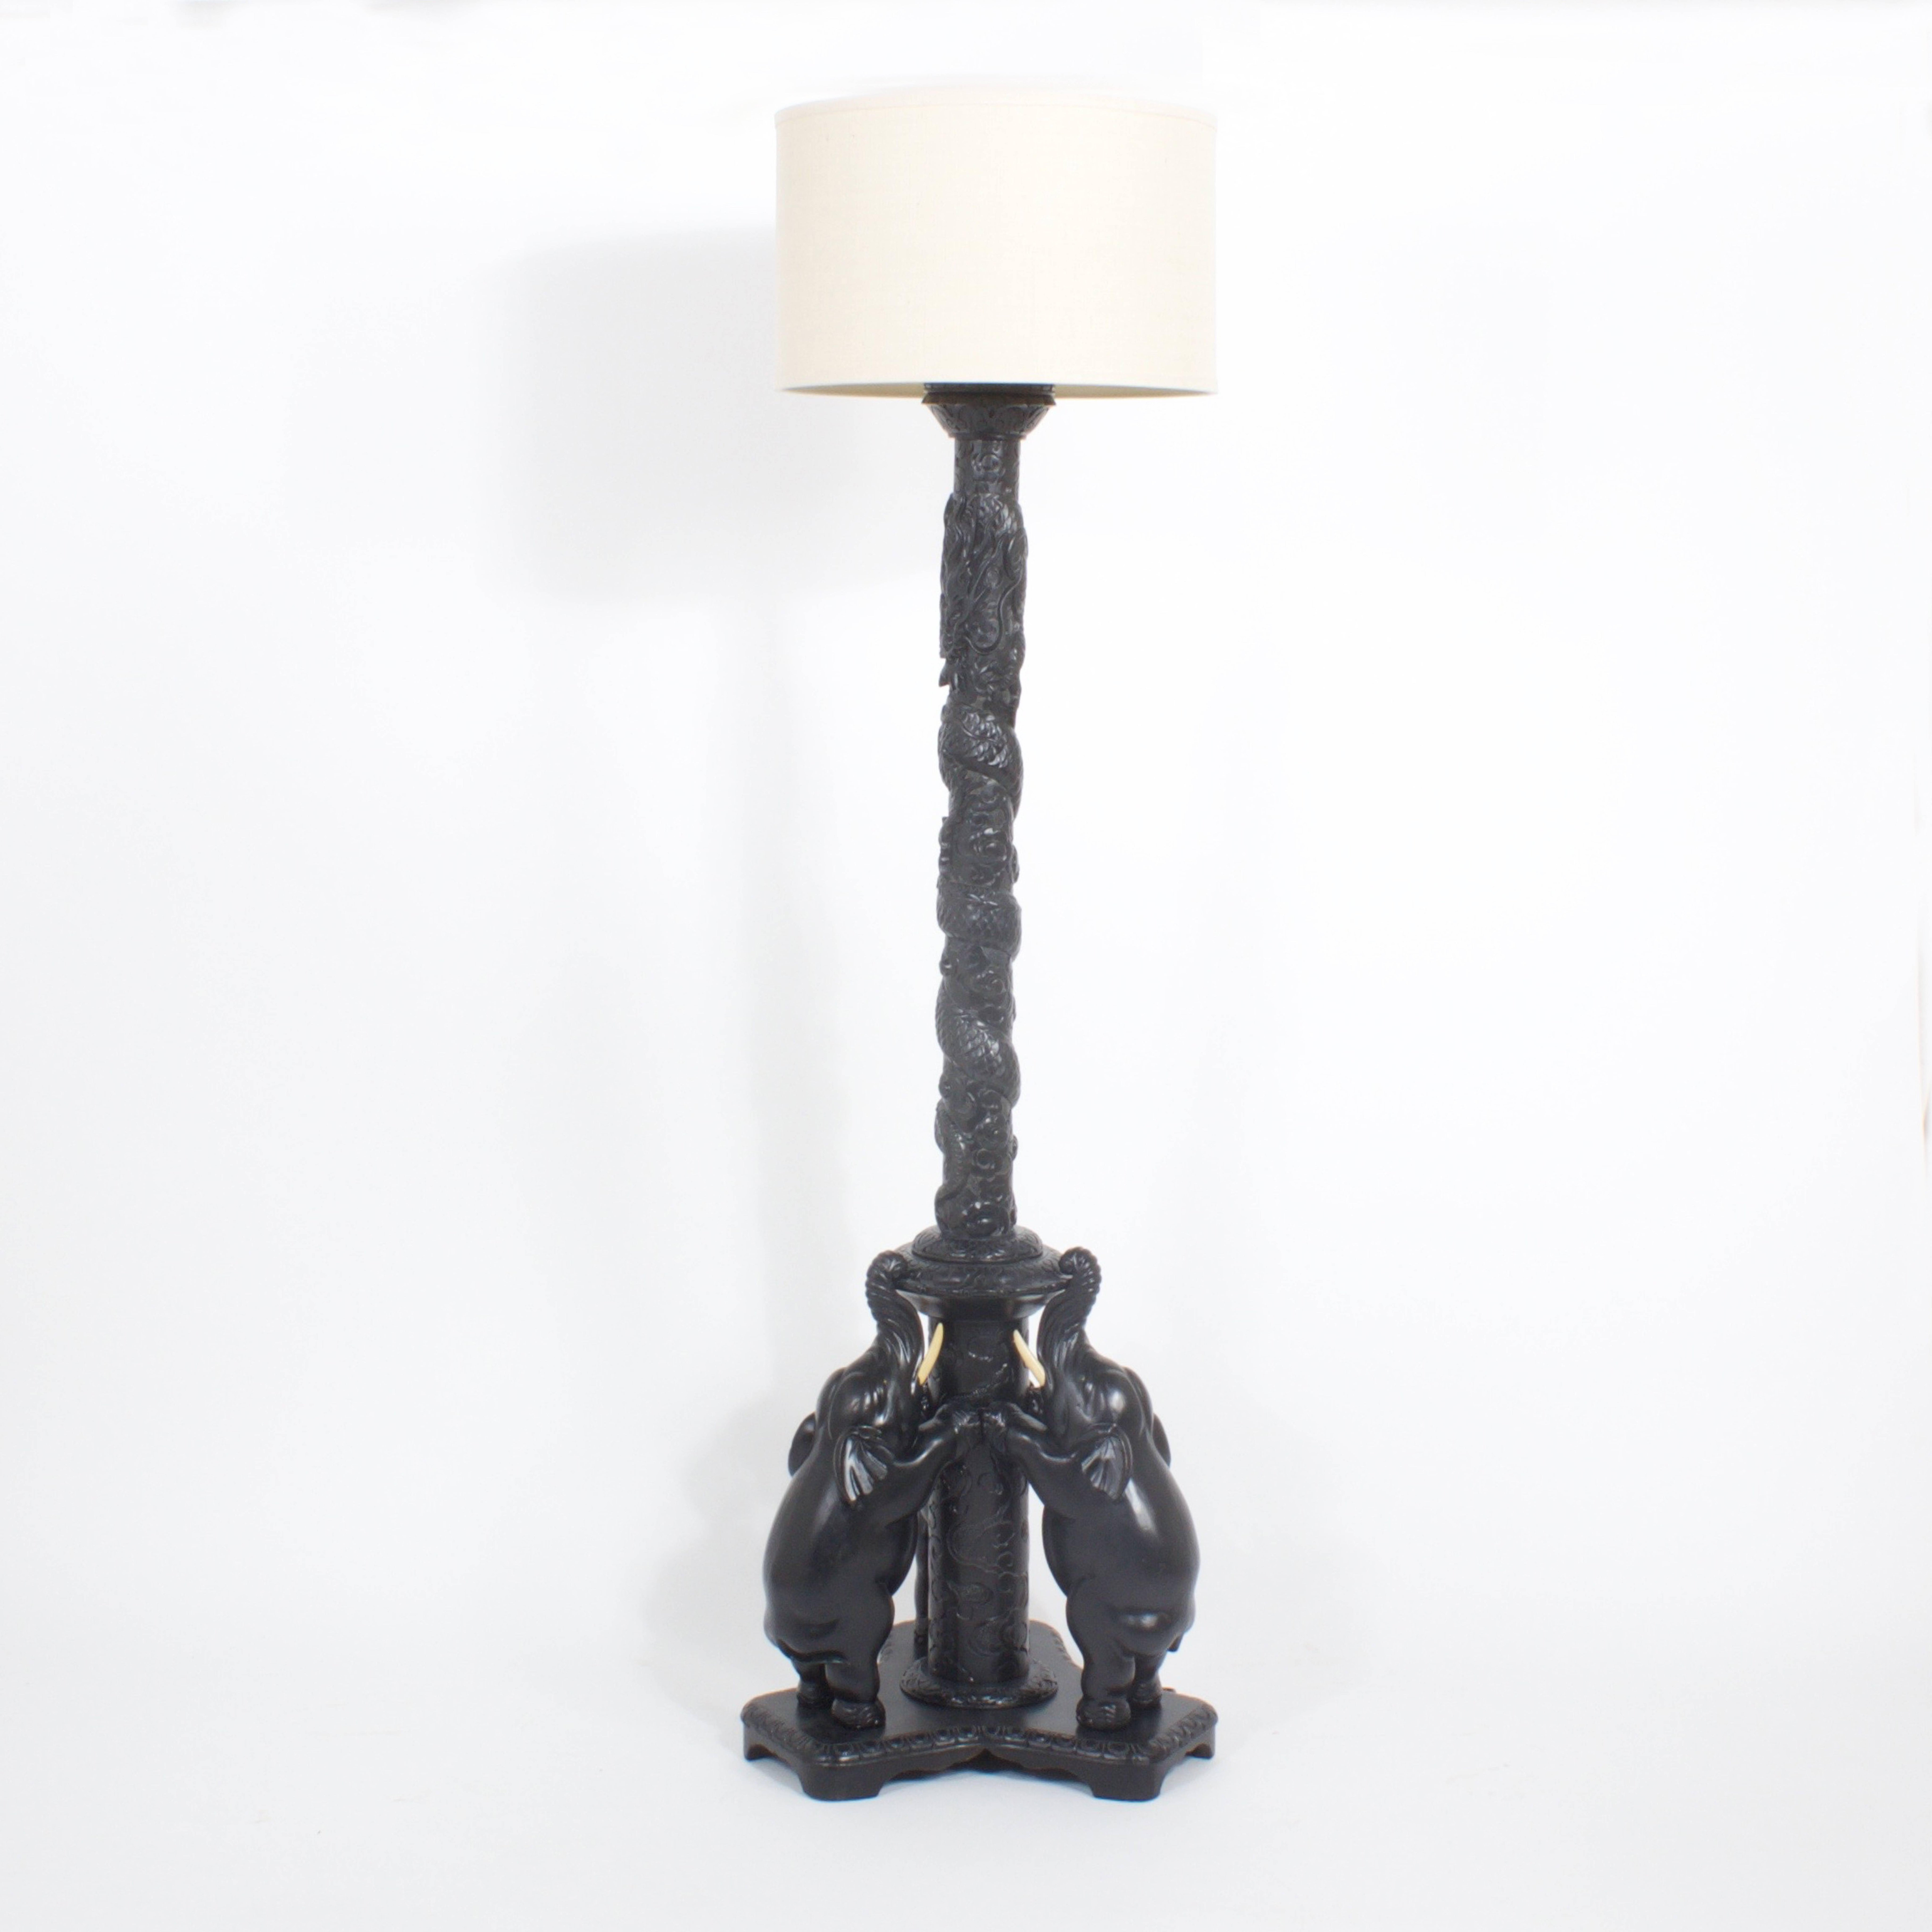 Anglo-Indian Pair of Hand-Carved Hardwood Elephant Floor Lamps